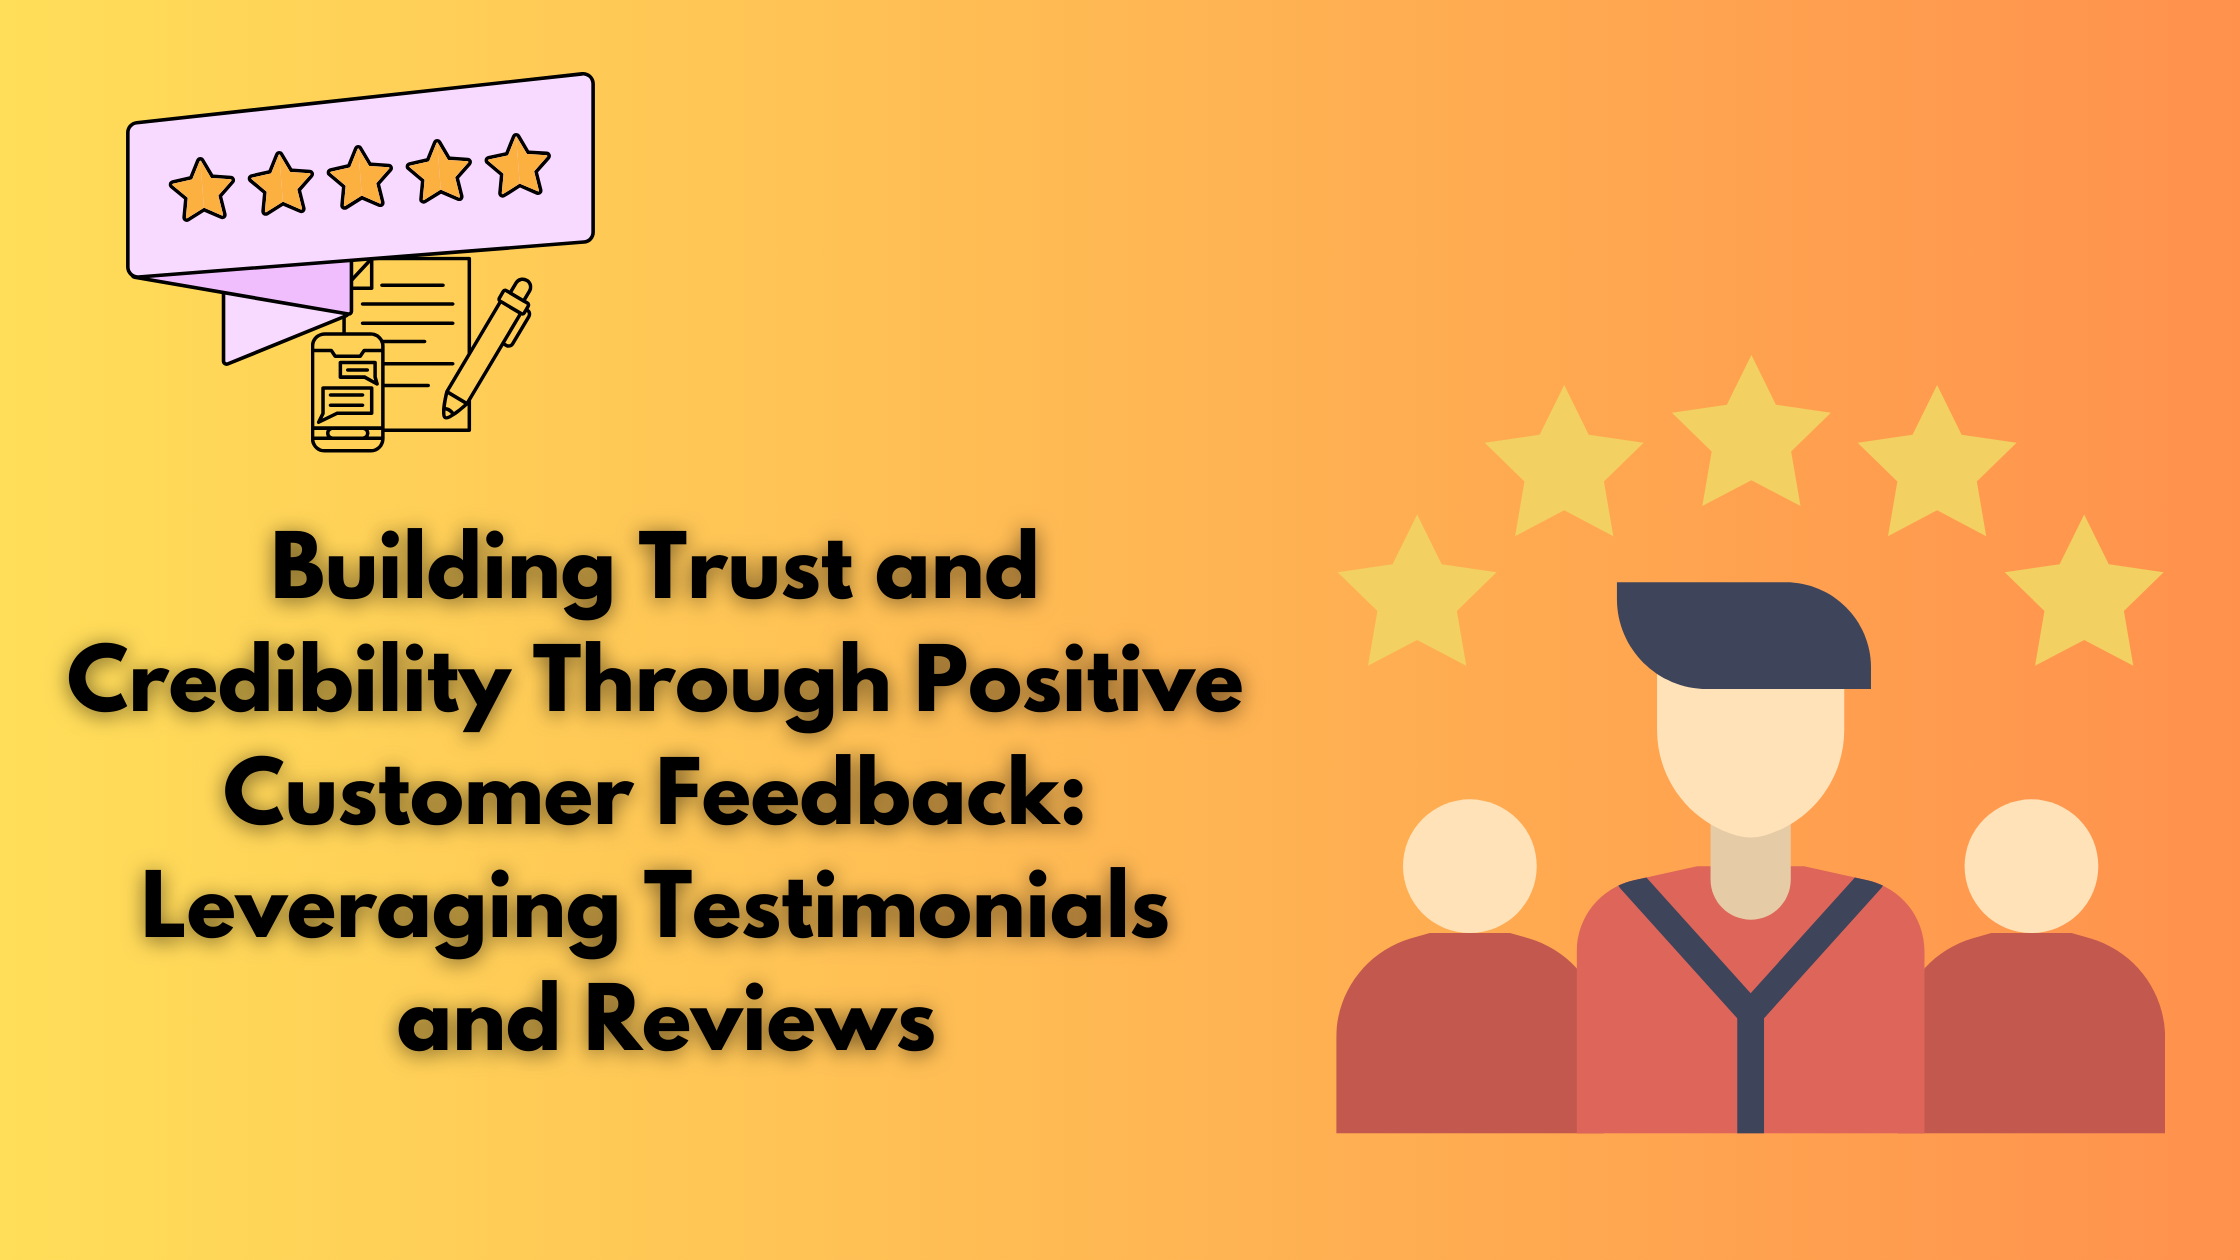 Building Trust and Credibility Through Positive Customer Feedback: Leveraging Testimonials and Reviews